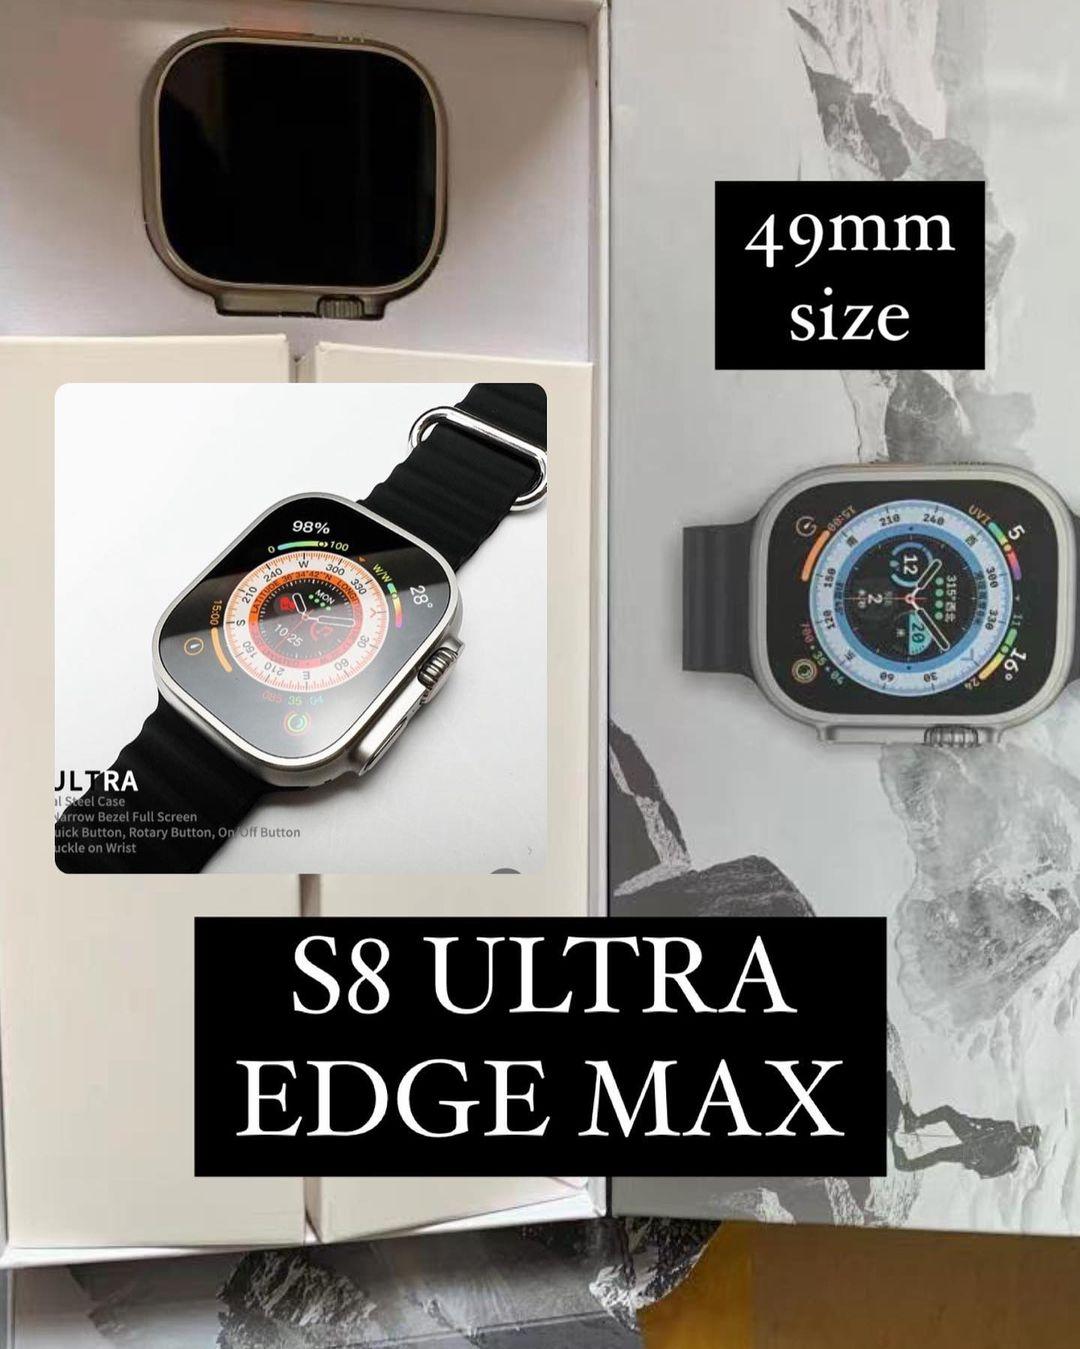 class="content__text"
 Series 8 Ultra Edge Max ⌚️ Latest iOs and android compatible ✉️ 
 